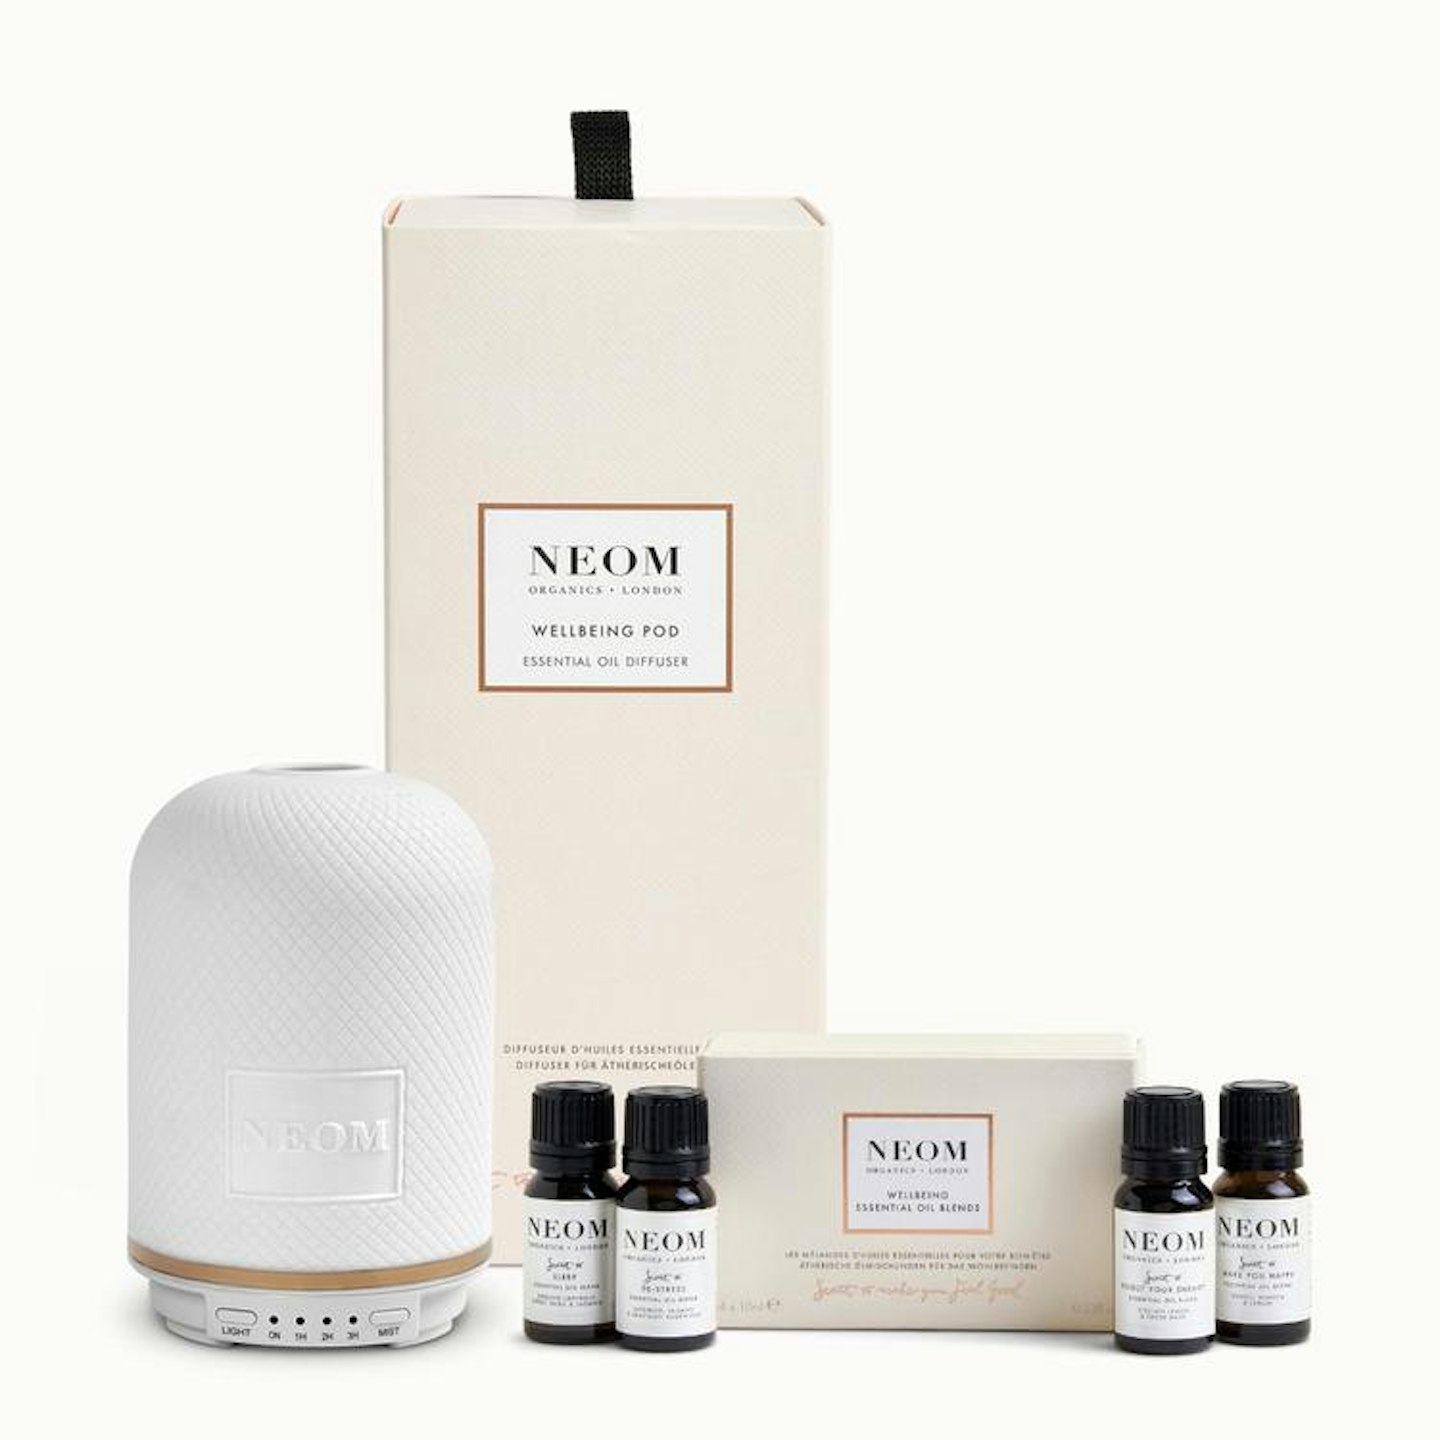 Neom, Essential Oil Diffuser: Wellbeing Pod, £150